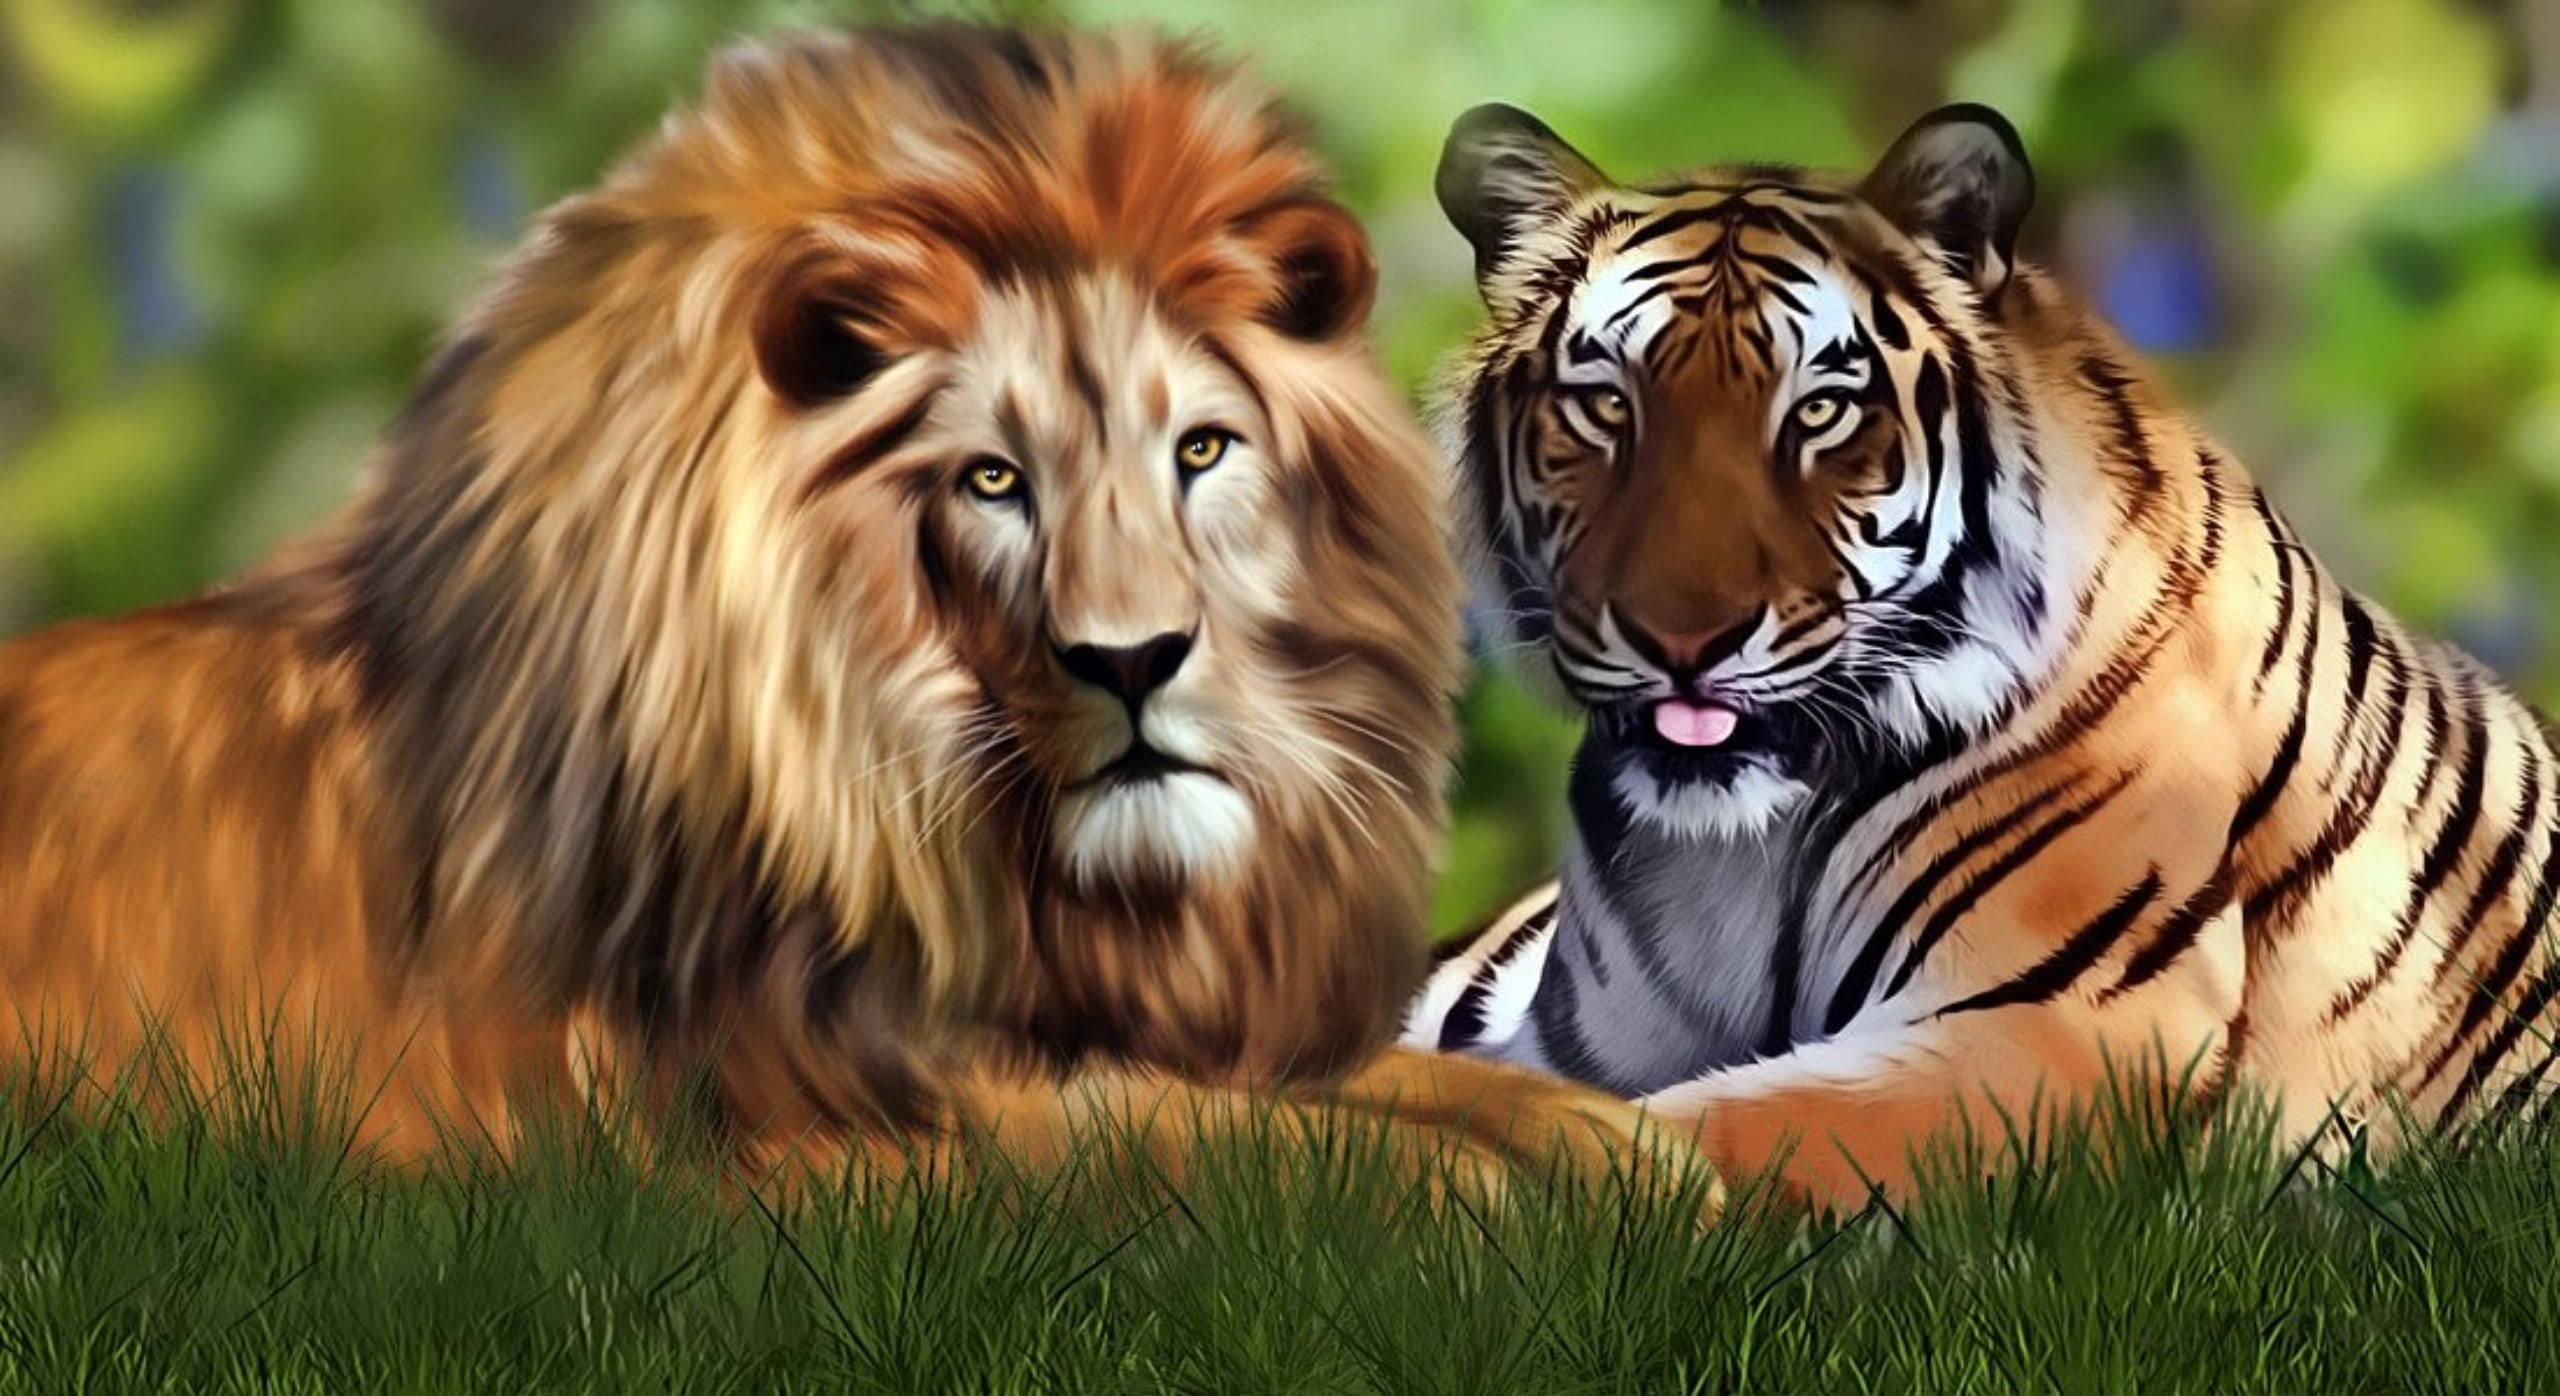 Lion And Tiger Art In Grass Wallpaper